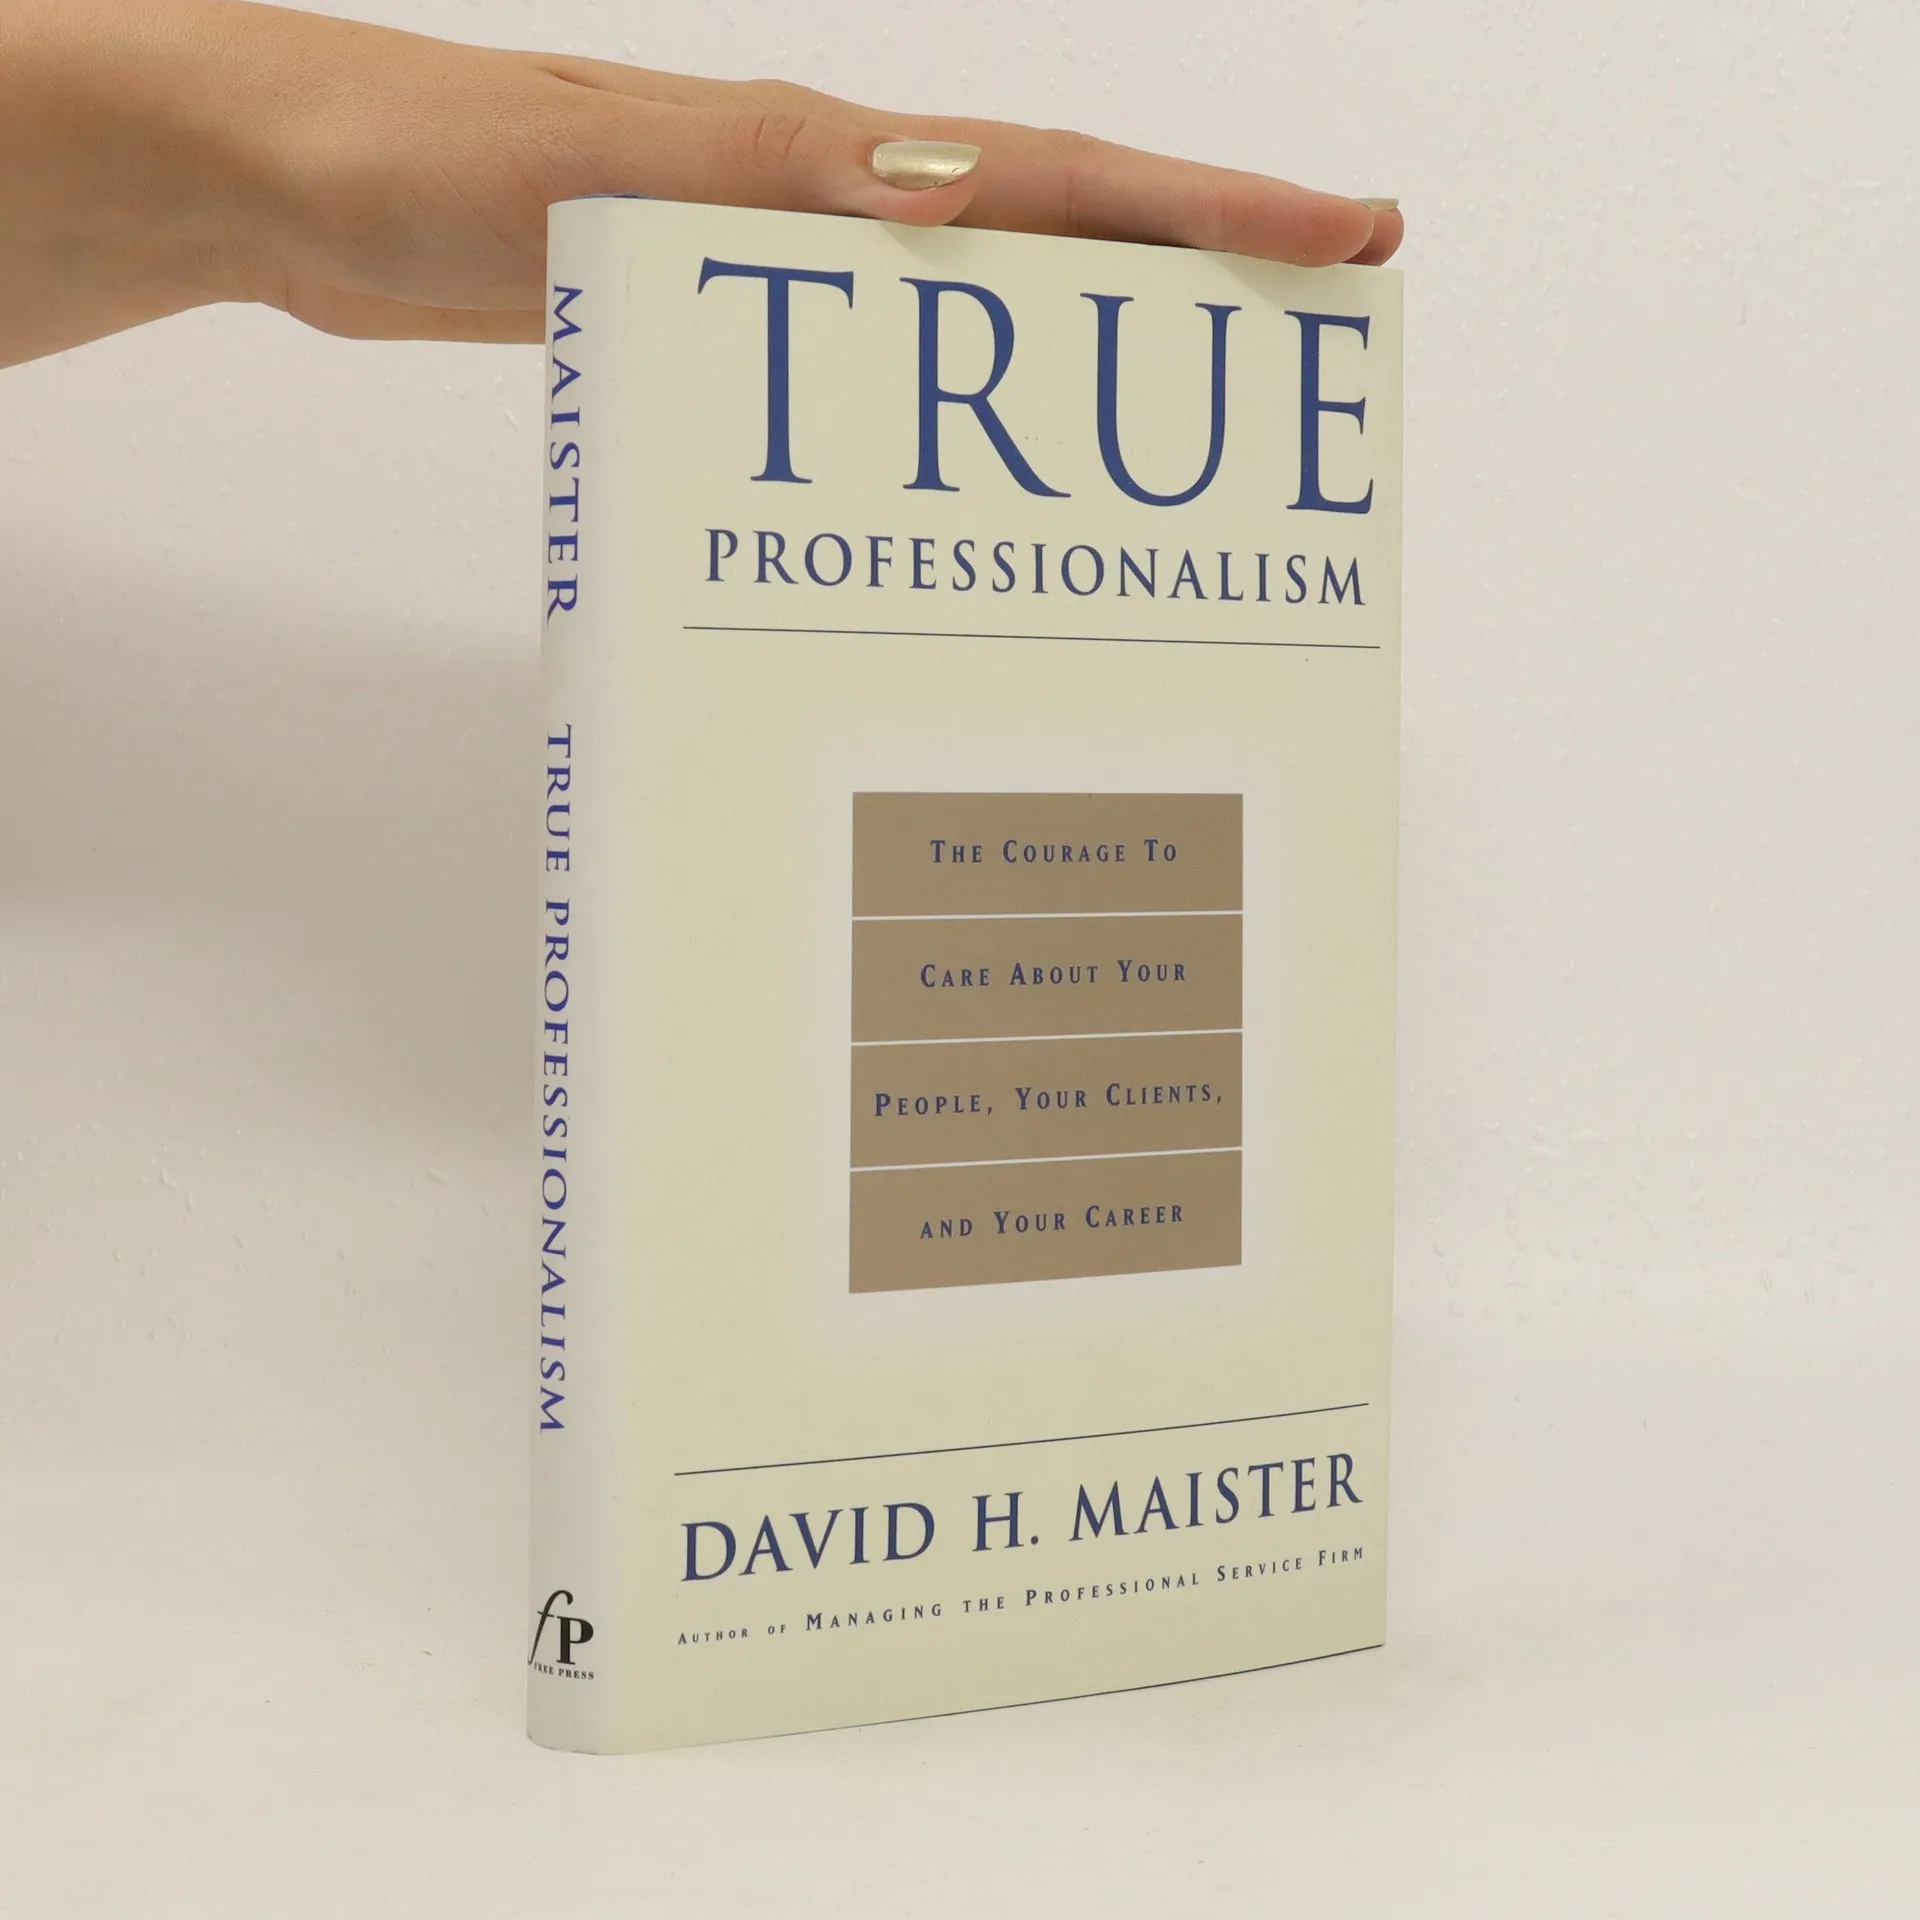 True professionalism : the courage to care about your people, your clients, and your career - Maister, David H - knihobot.cz